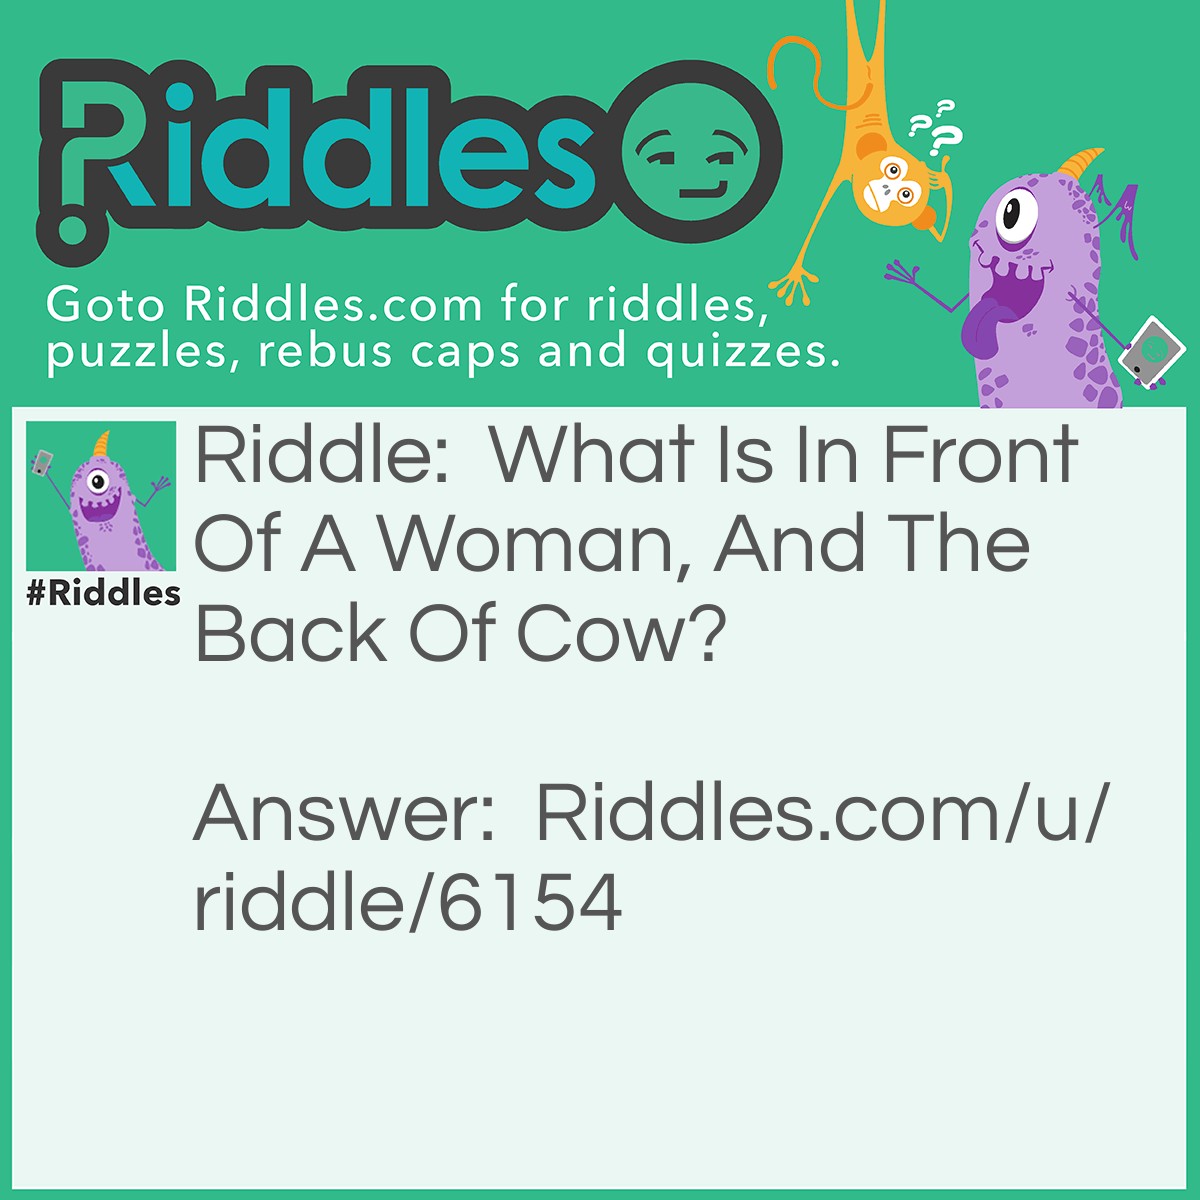 Riddle: What Is In Front Of A Woman, And The Back Of Cow? Answer: The Letter "W"